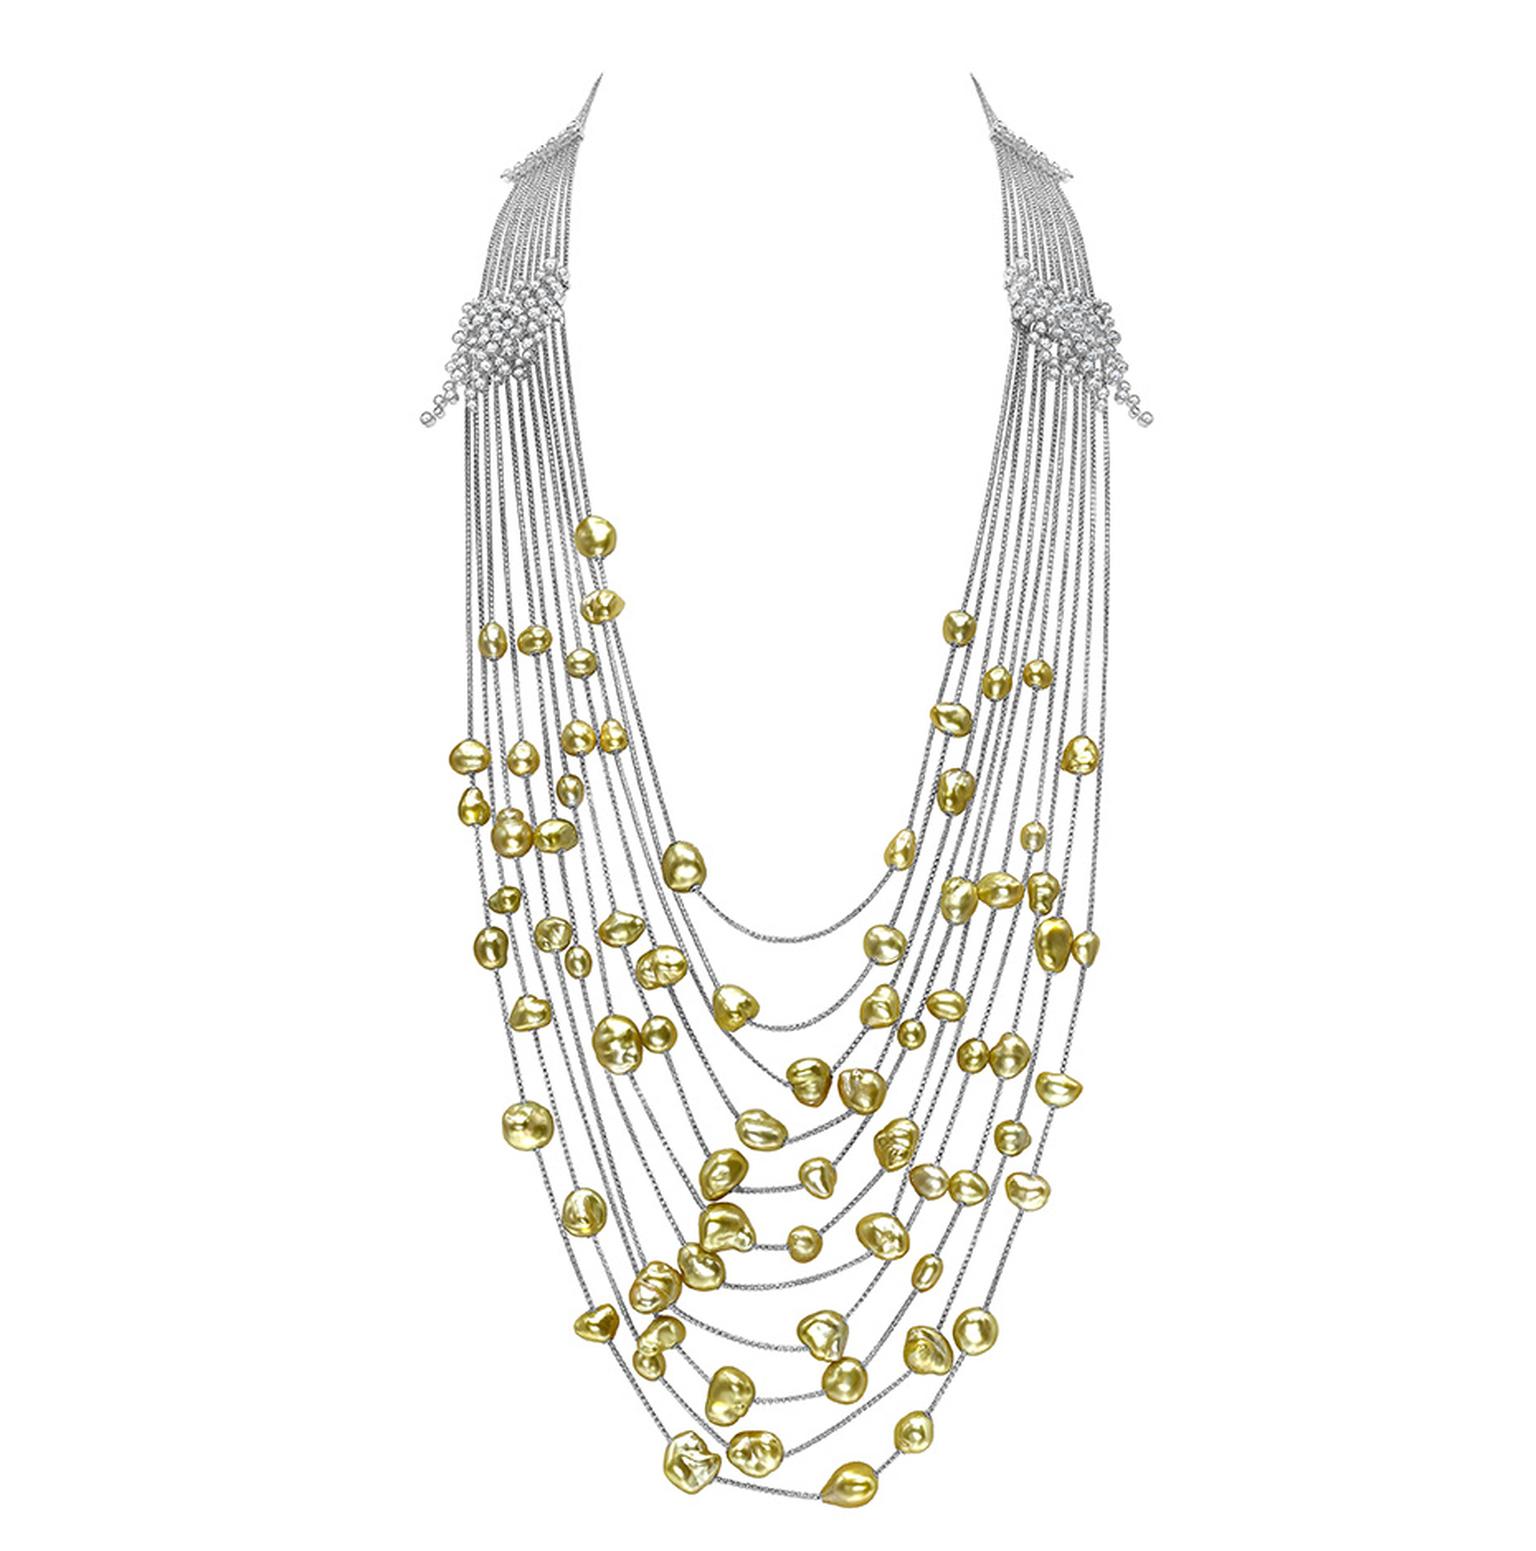 Mikimoto Gold Cascade necklace featuring gold pearls and diamonds in white gold